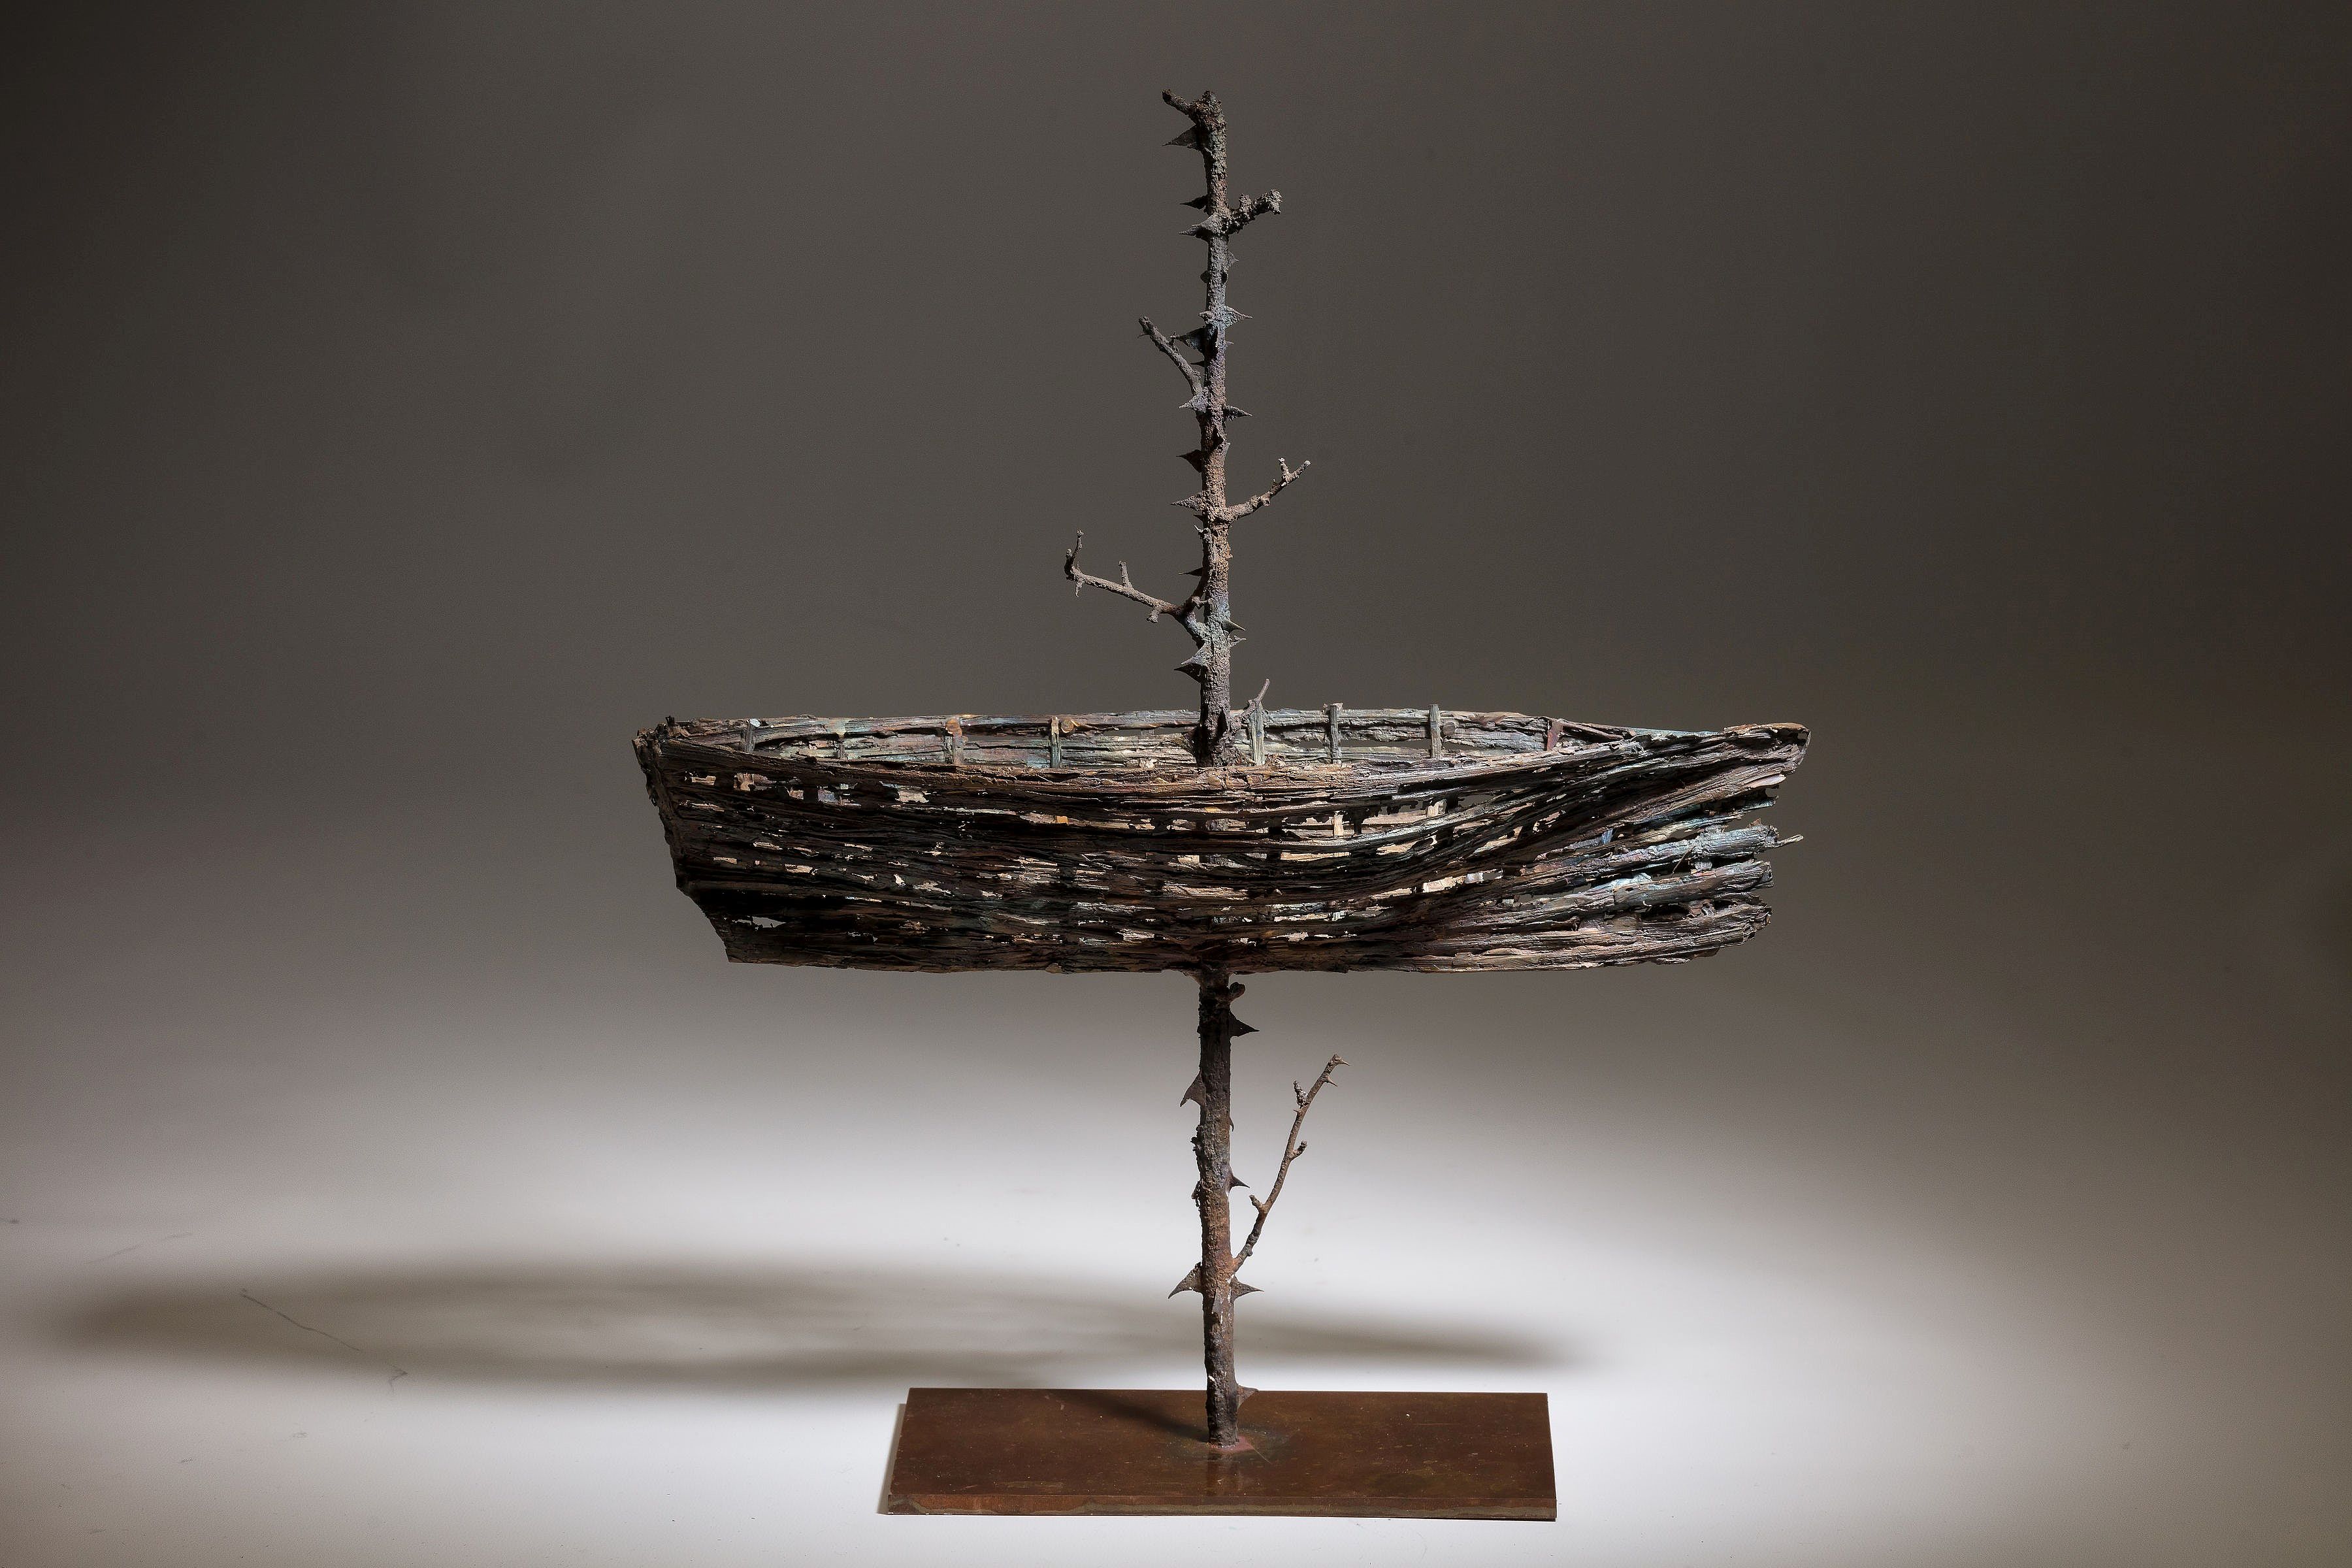 Sanctuary-Dungeness Boat  by Robyn  Neild